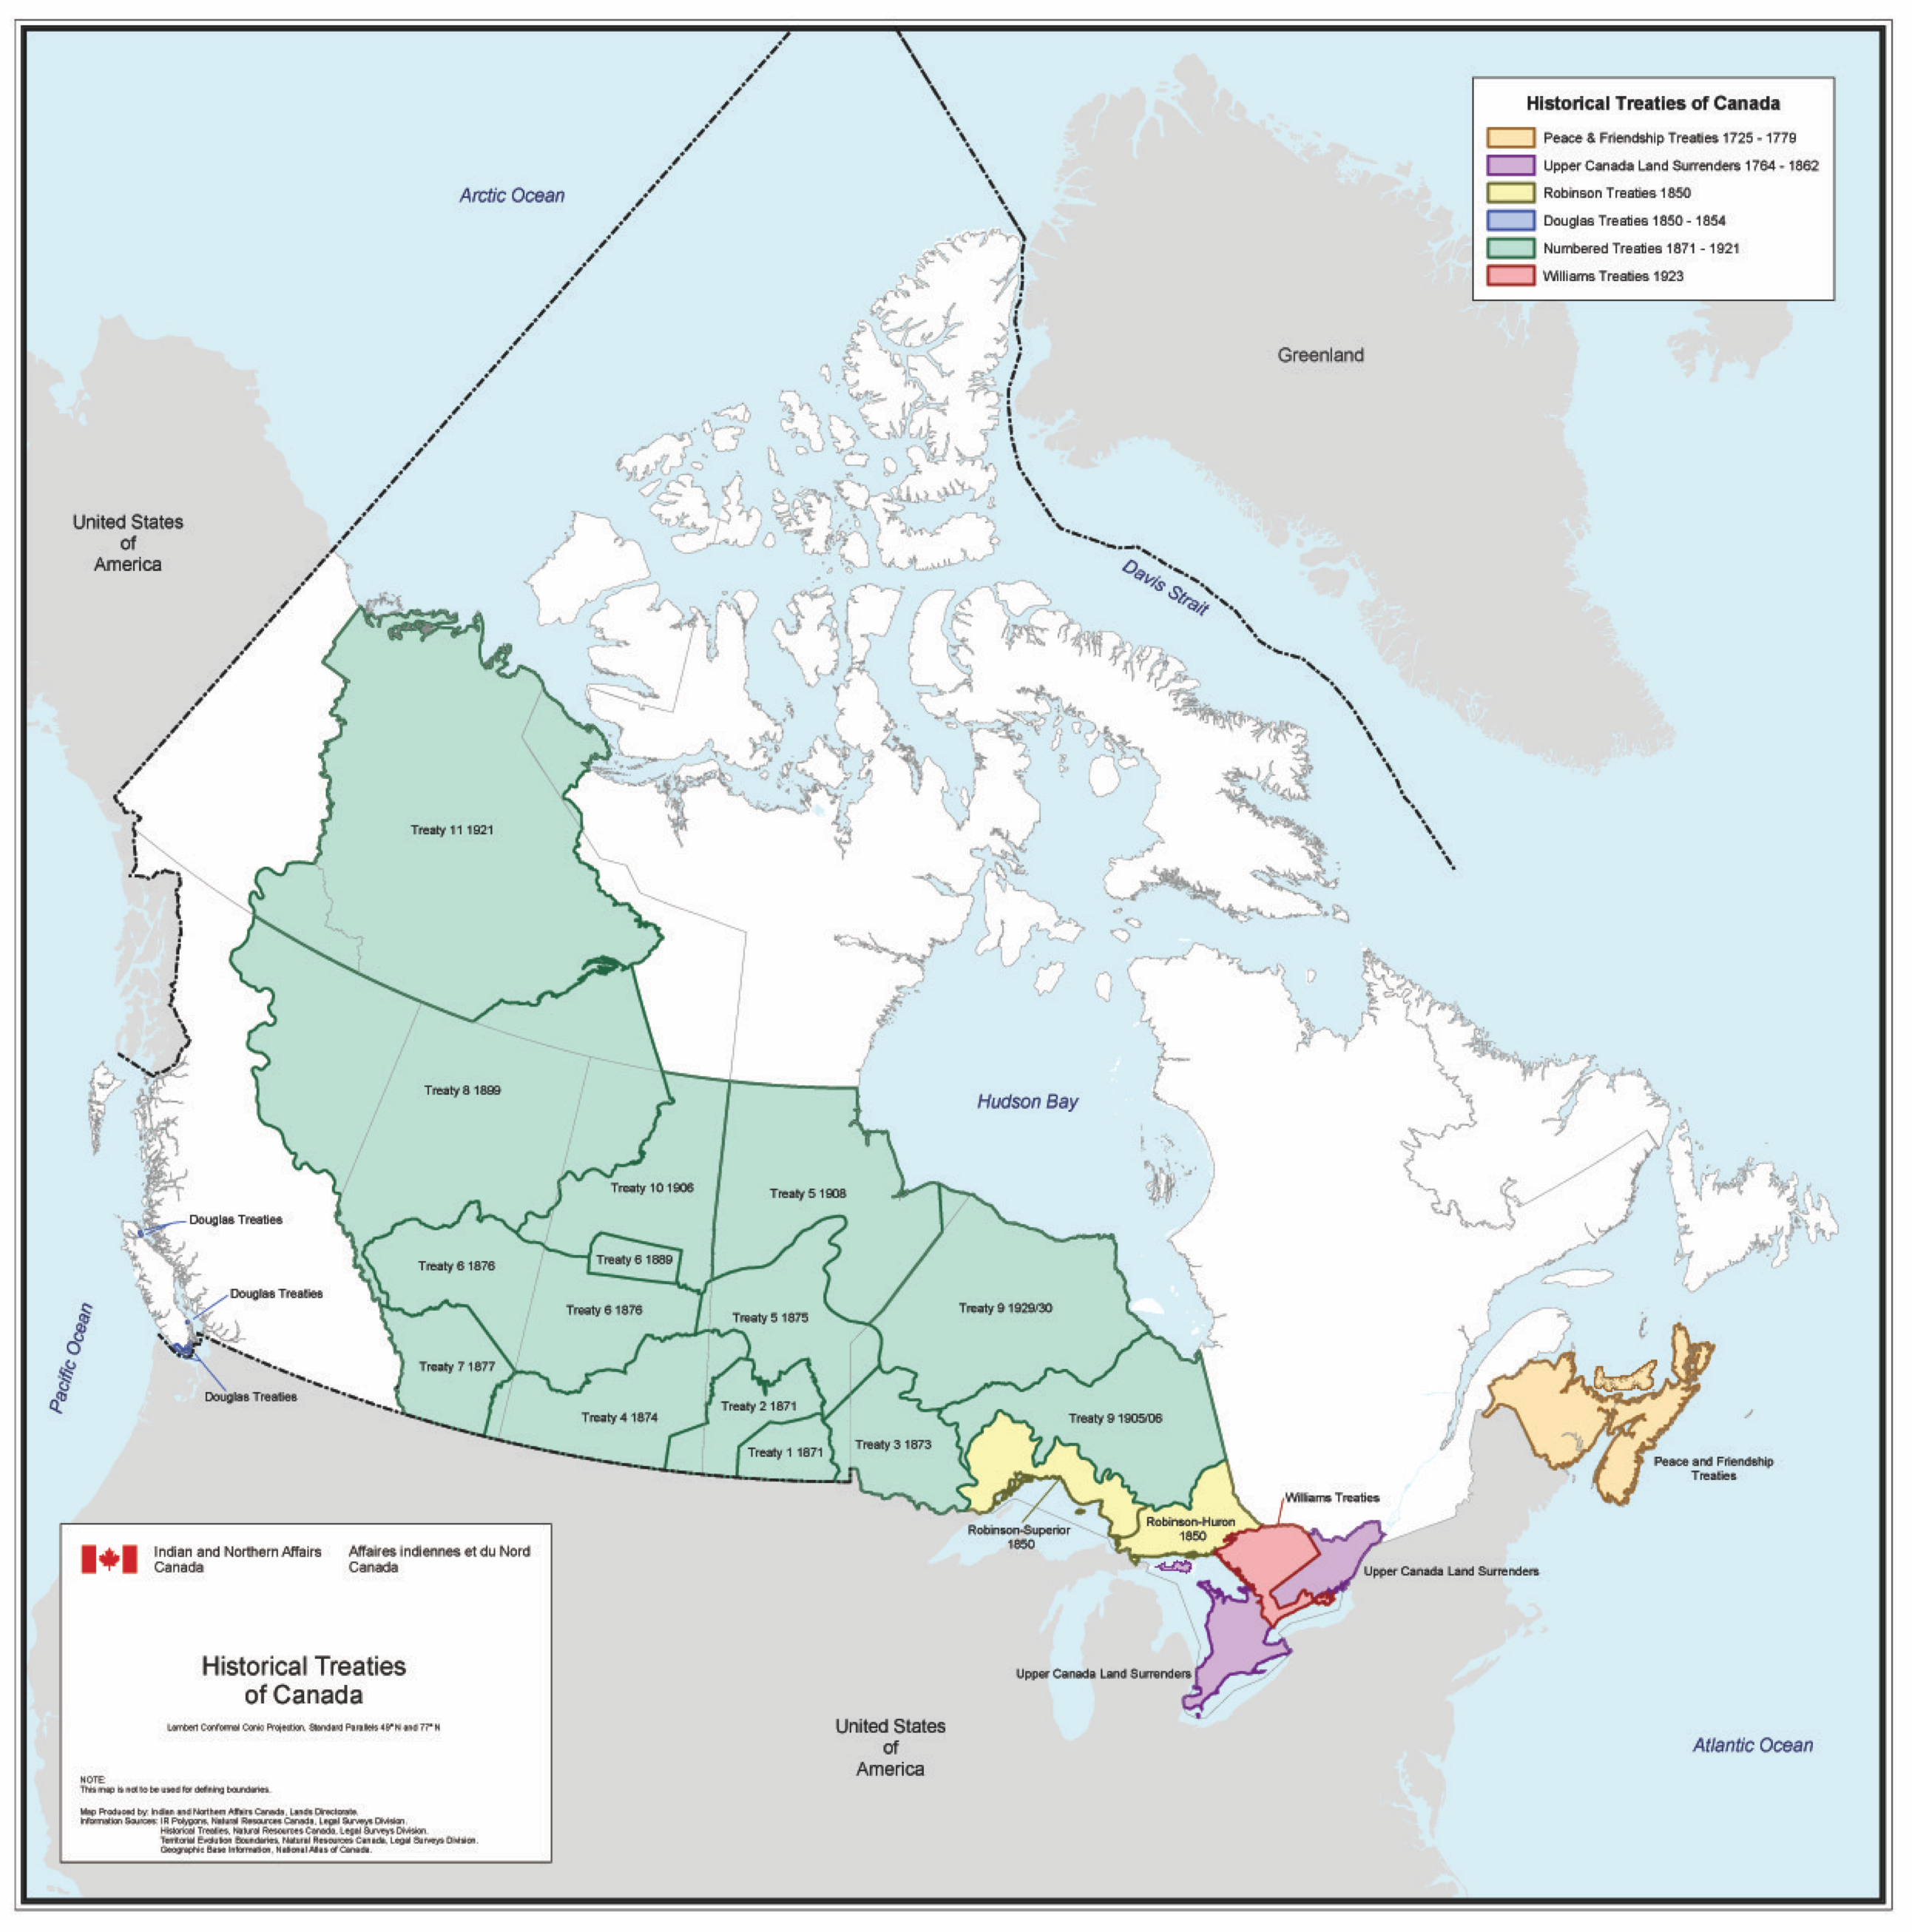 Map of land cessions in Canada pre-1975